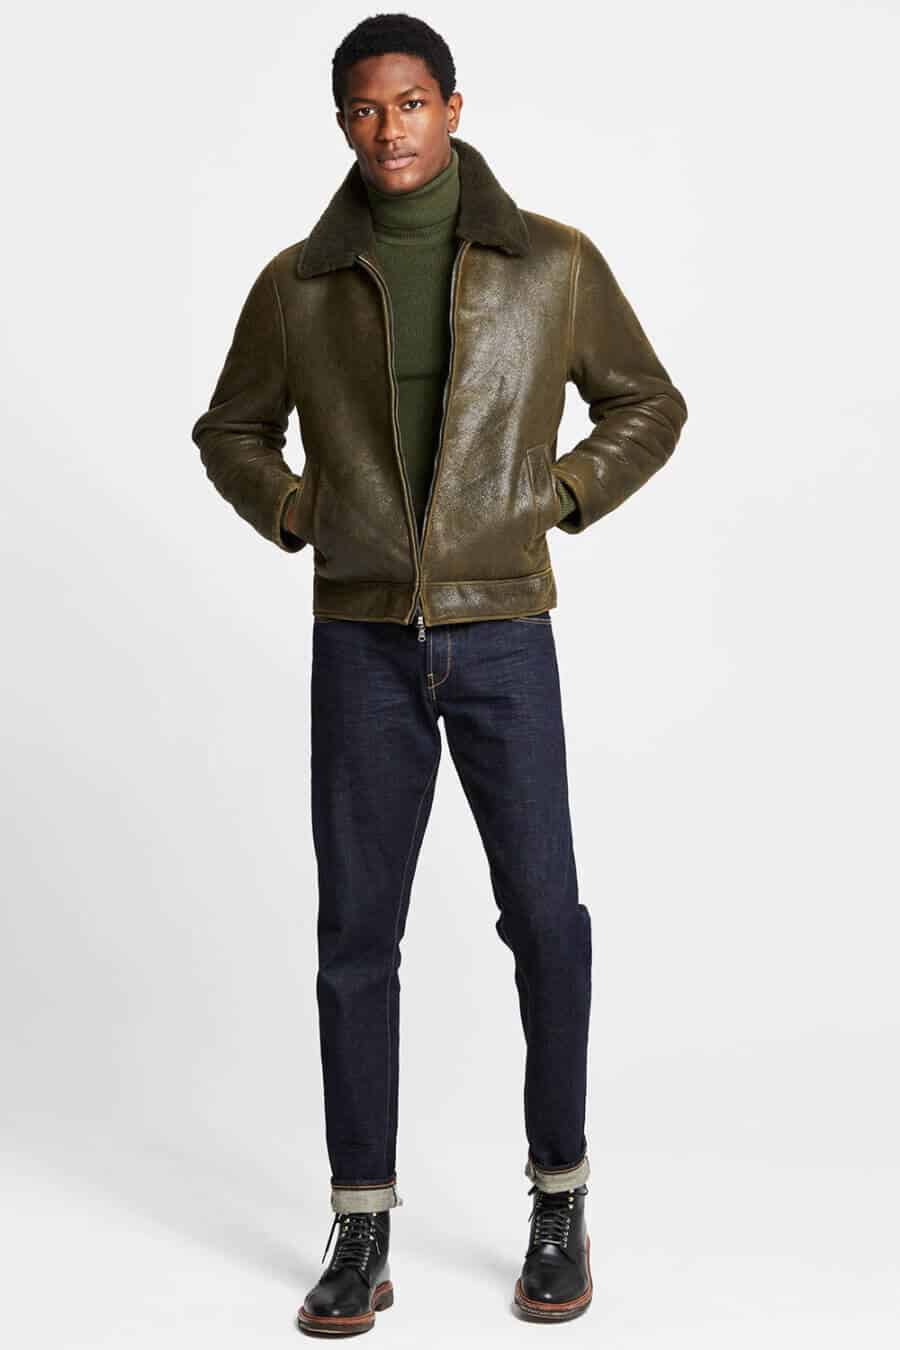 Men's green leather jacket, turtleneck, jeans and boots outfit